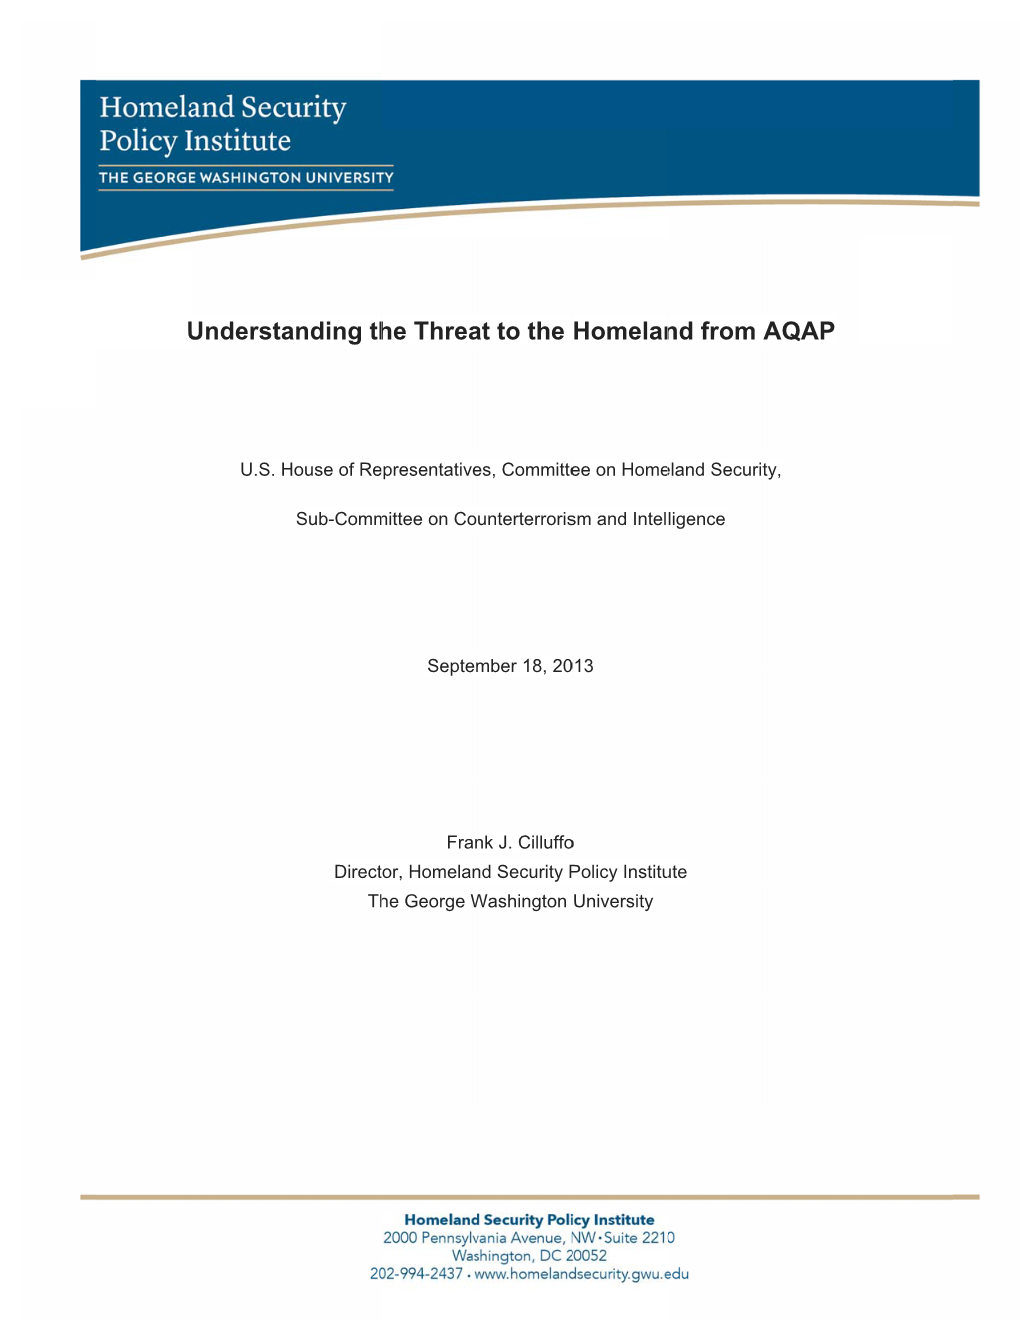 Understanding the Threat to the Homeland from AQAP